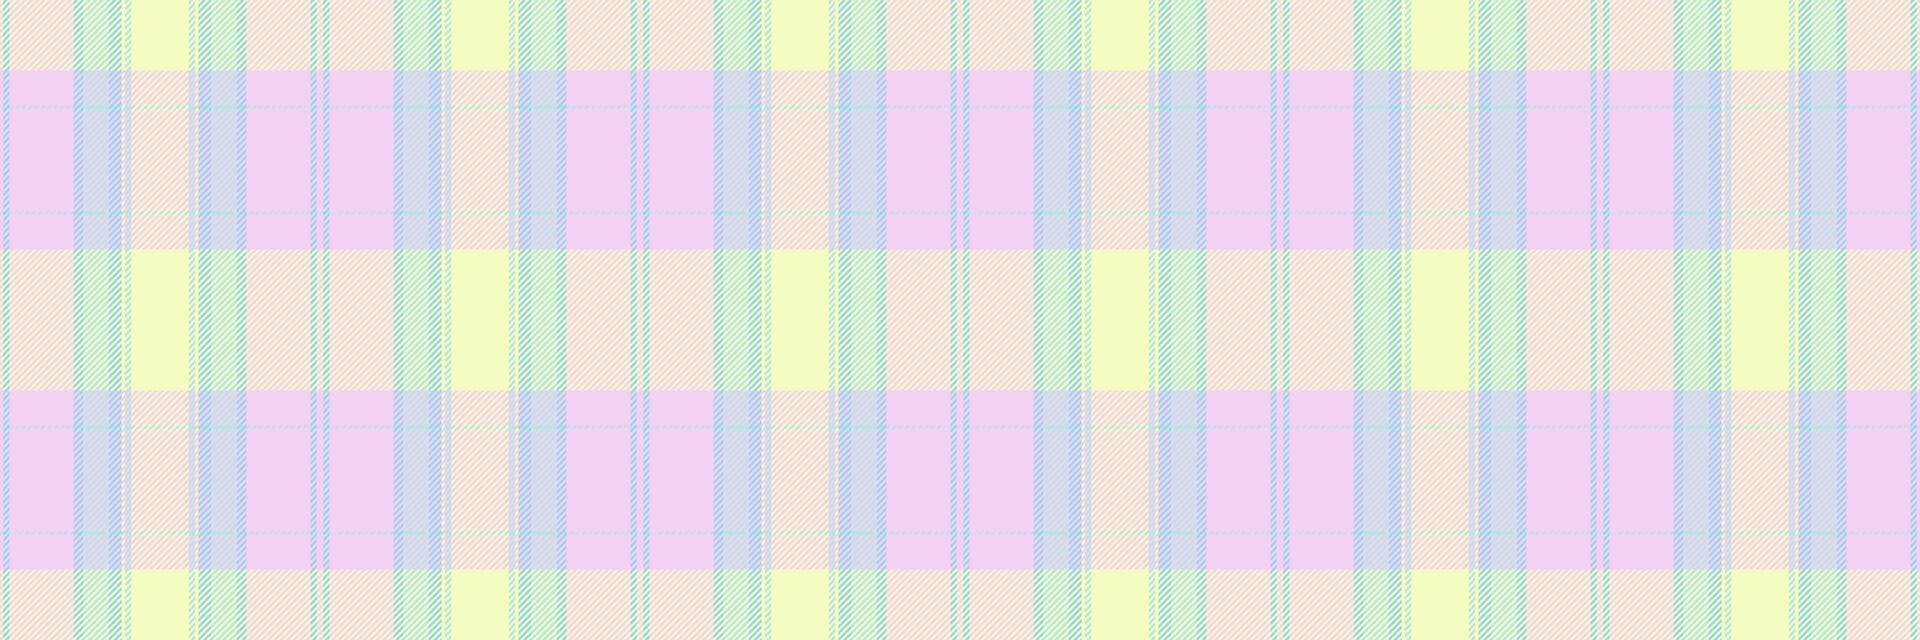 Display plaid seamless , open background check fabric. Top tartan textile pattern texture in light and cyan colors. vector